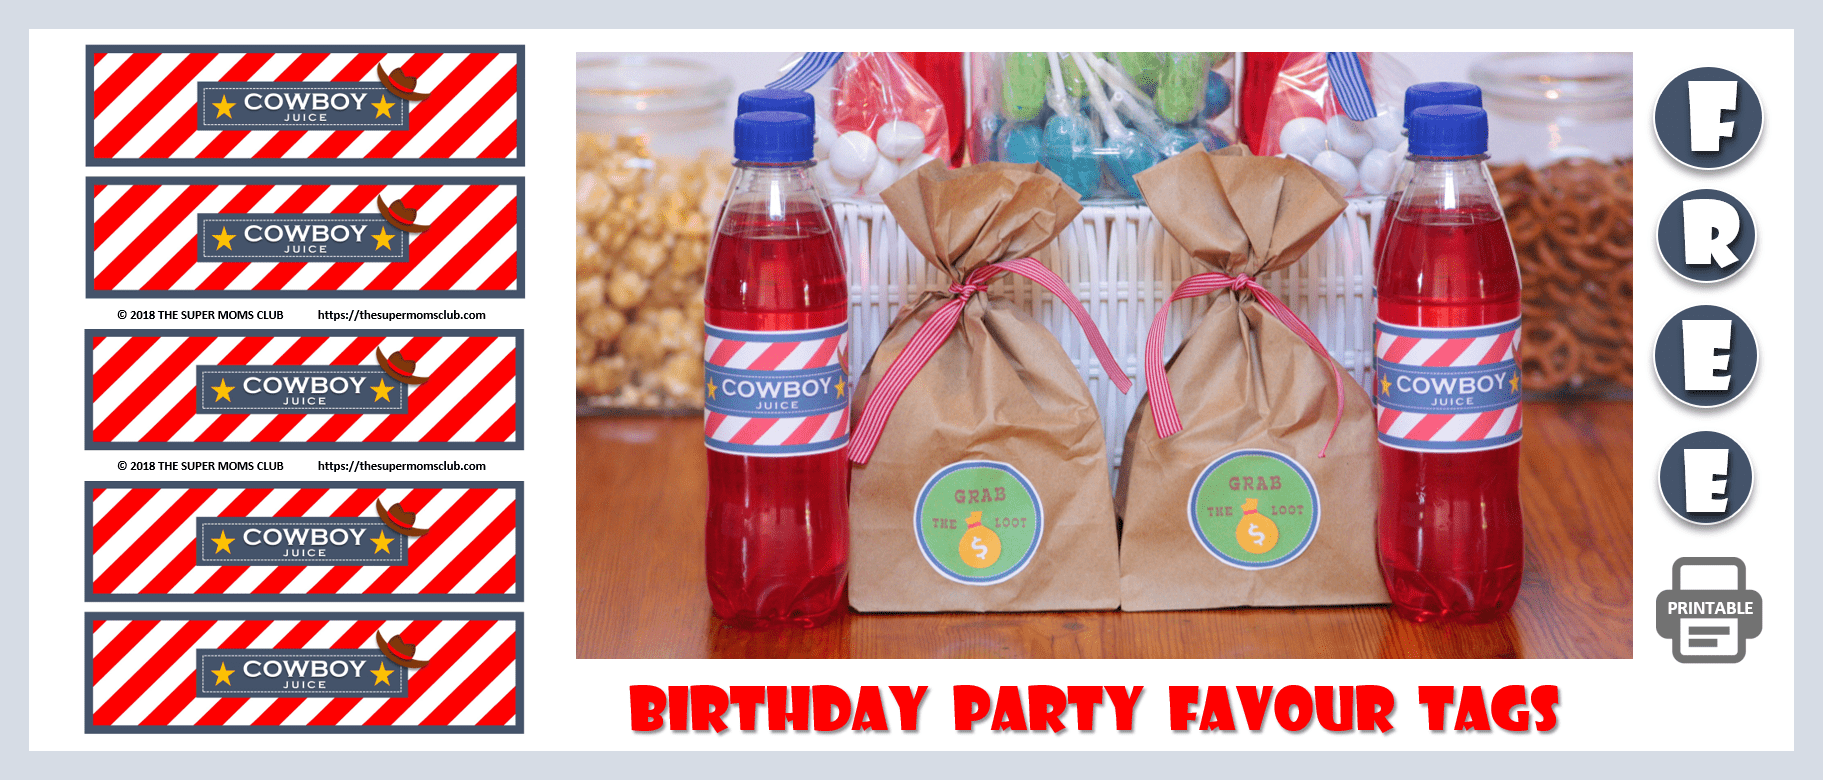 Cowboy Themed Birthday Party FREE PRINTABLE Favour Tags - The Super Moms Club